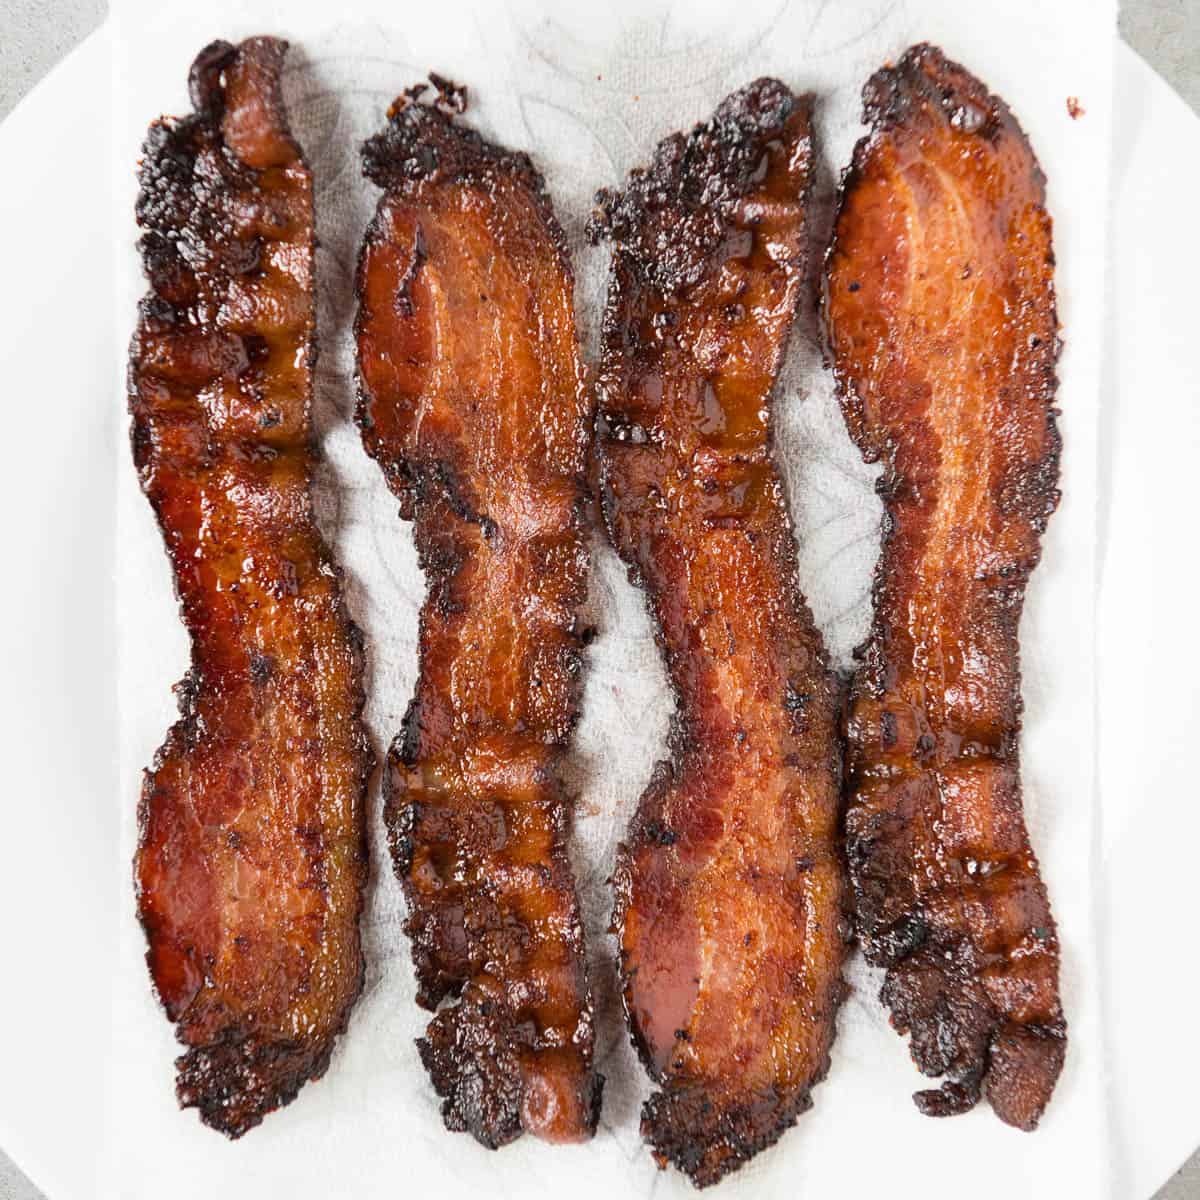 https://selfproclaimedfoodie.com/wp-content/uploads/cook-bacon-oven-square-1.jpg